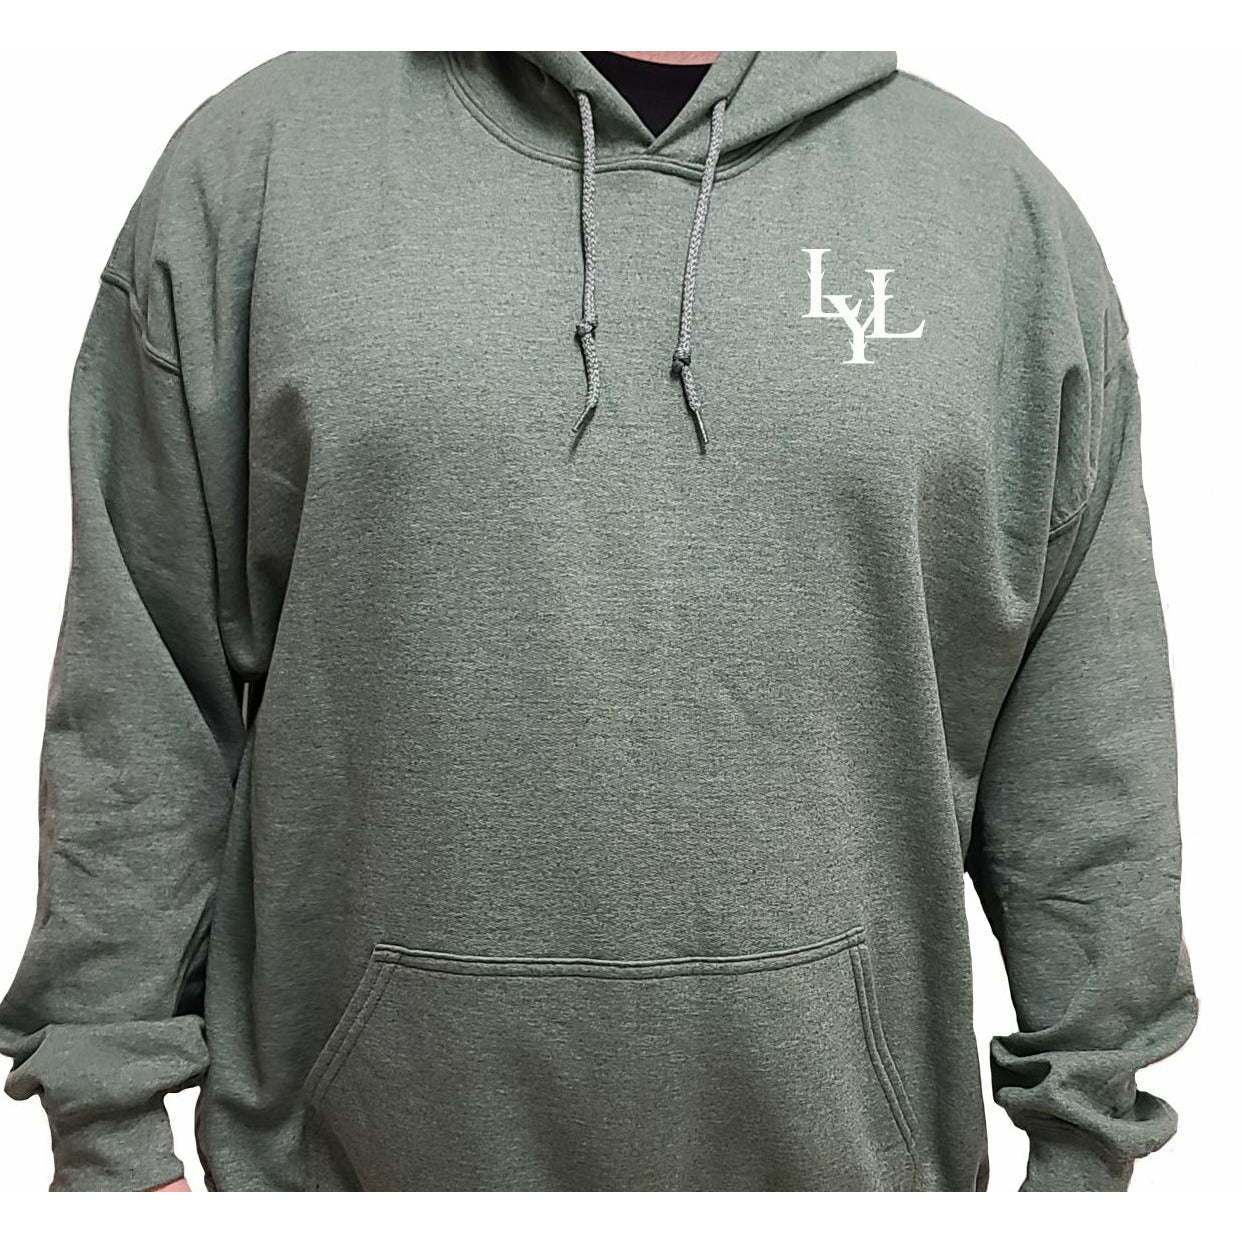 Men's LyL Work Wear Hoodie - Leave Your Legacy Clothing